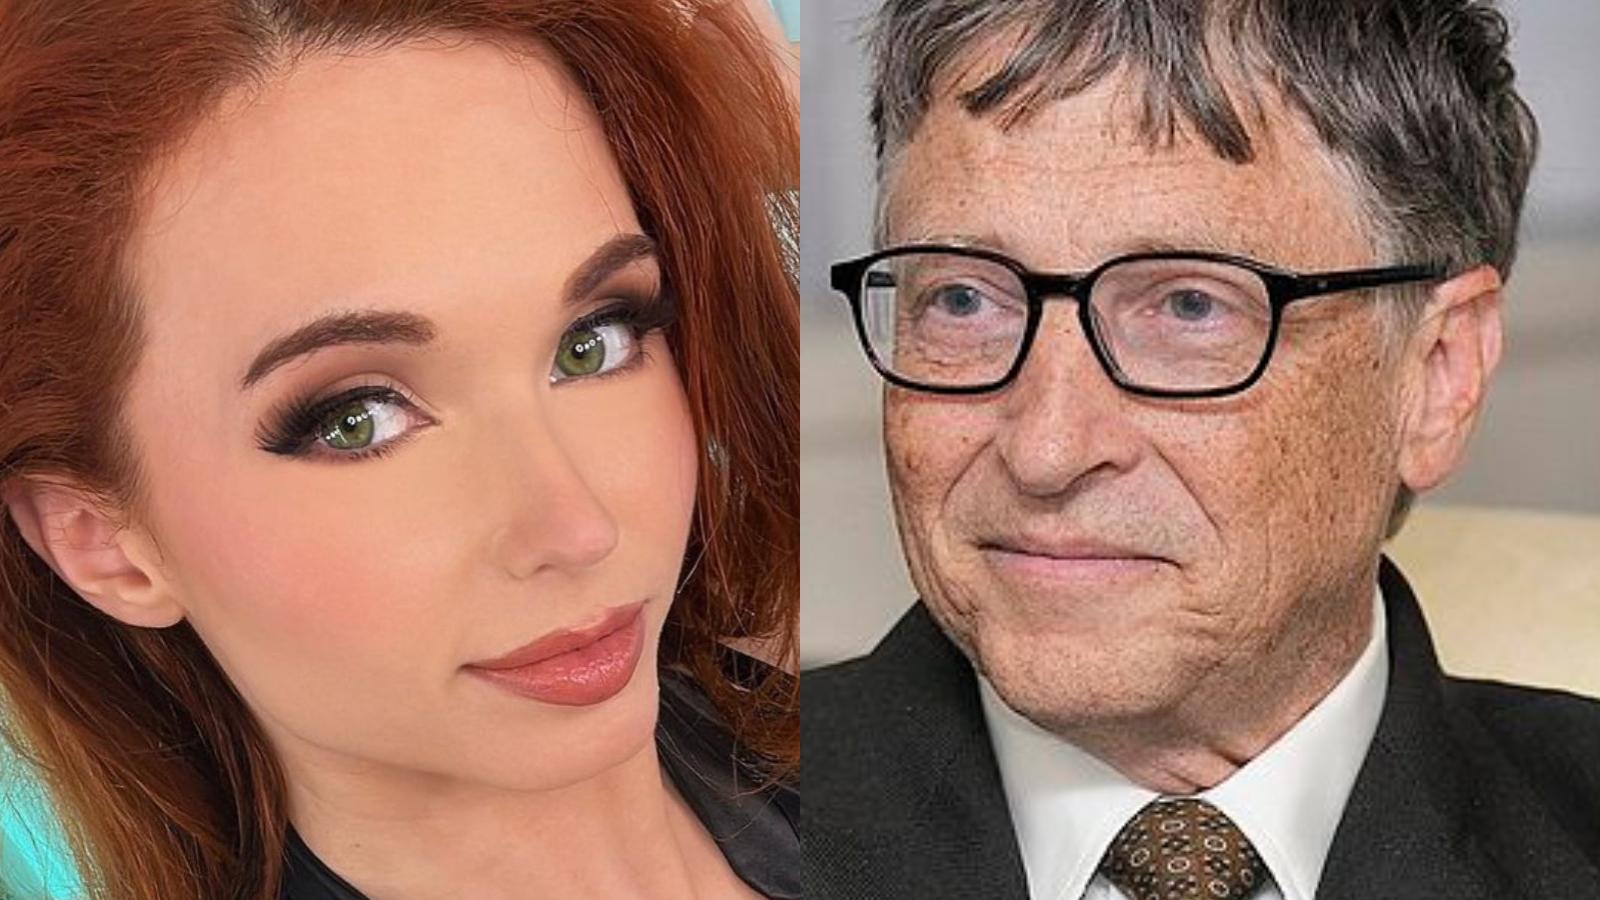 amouranth next to bill gates in a side-by-side